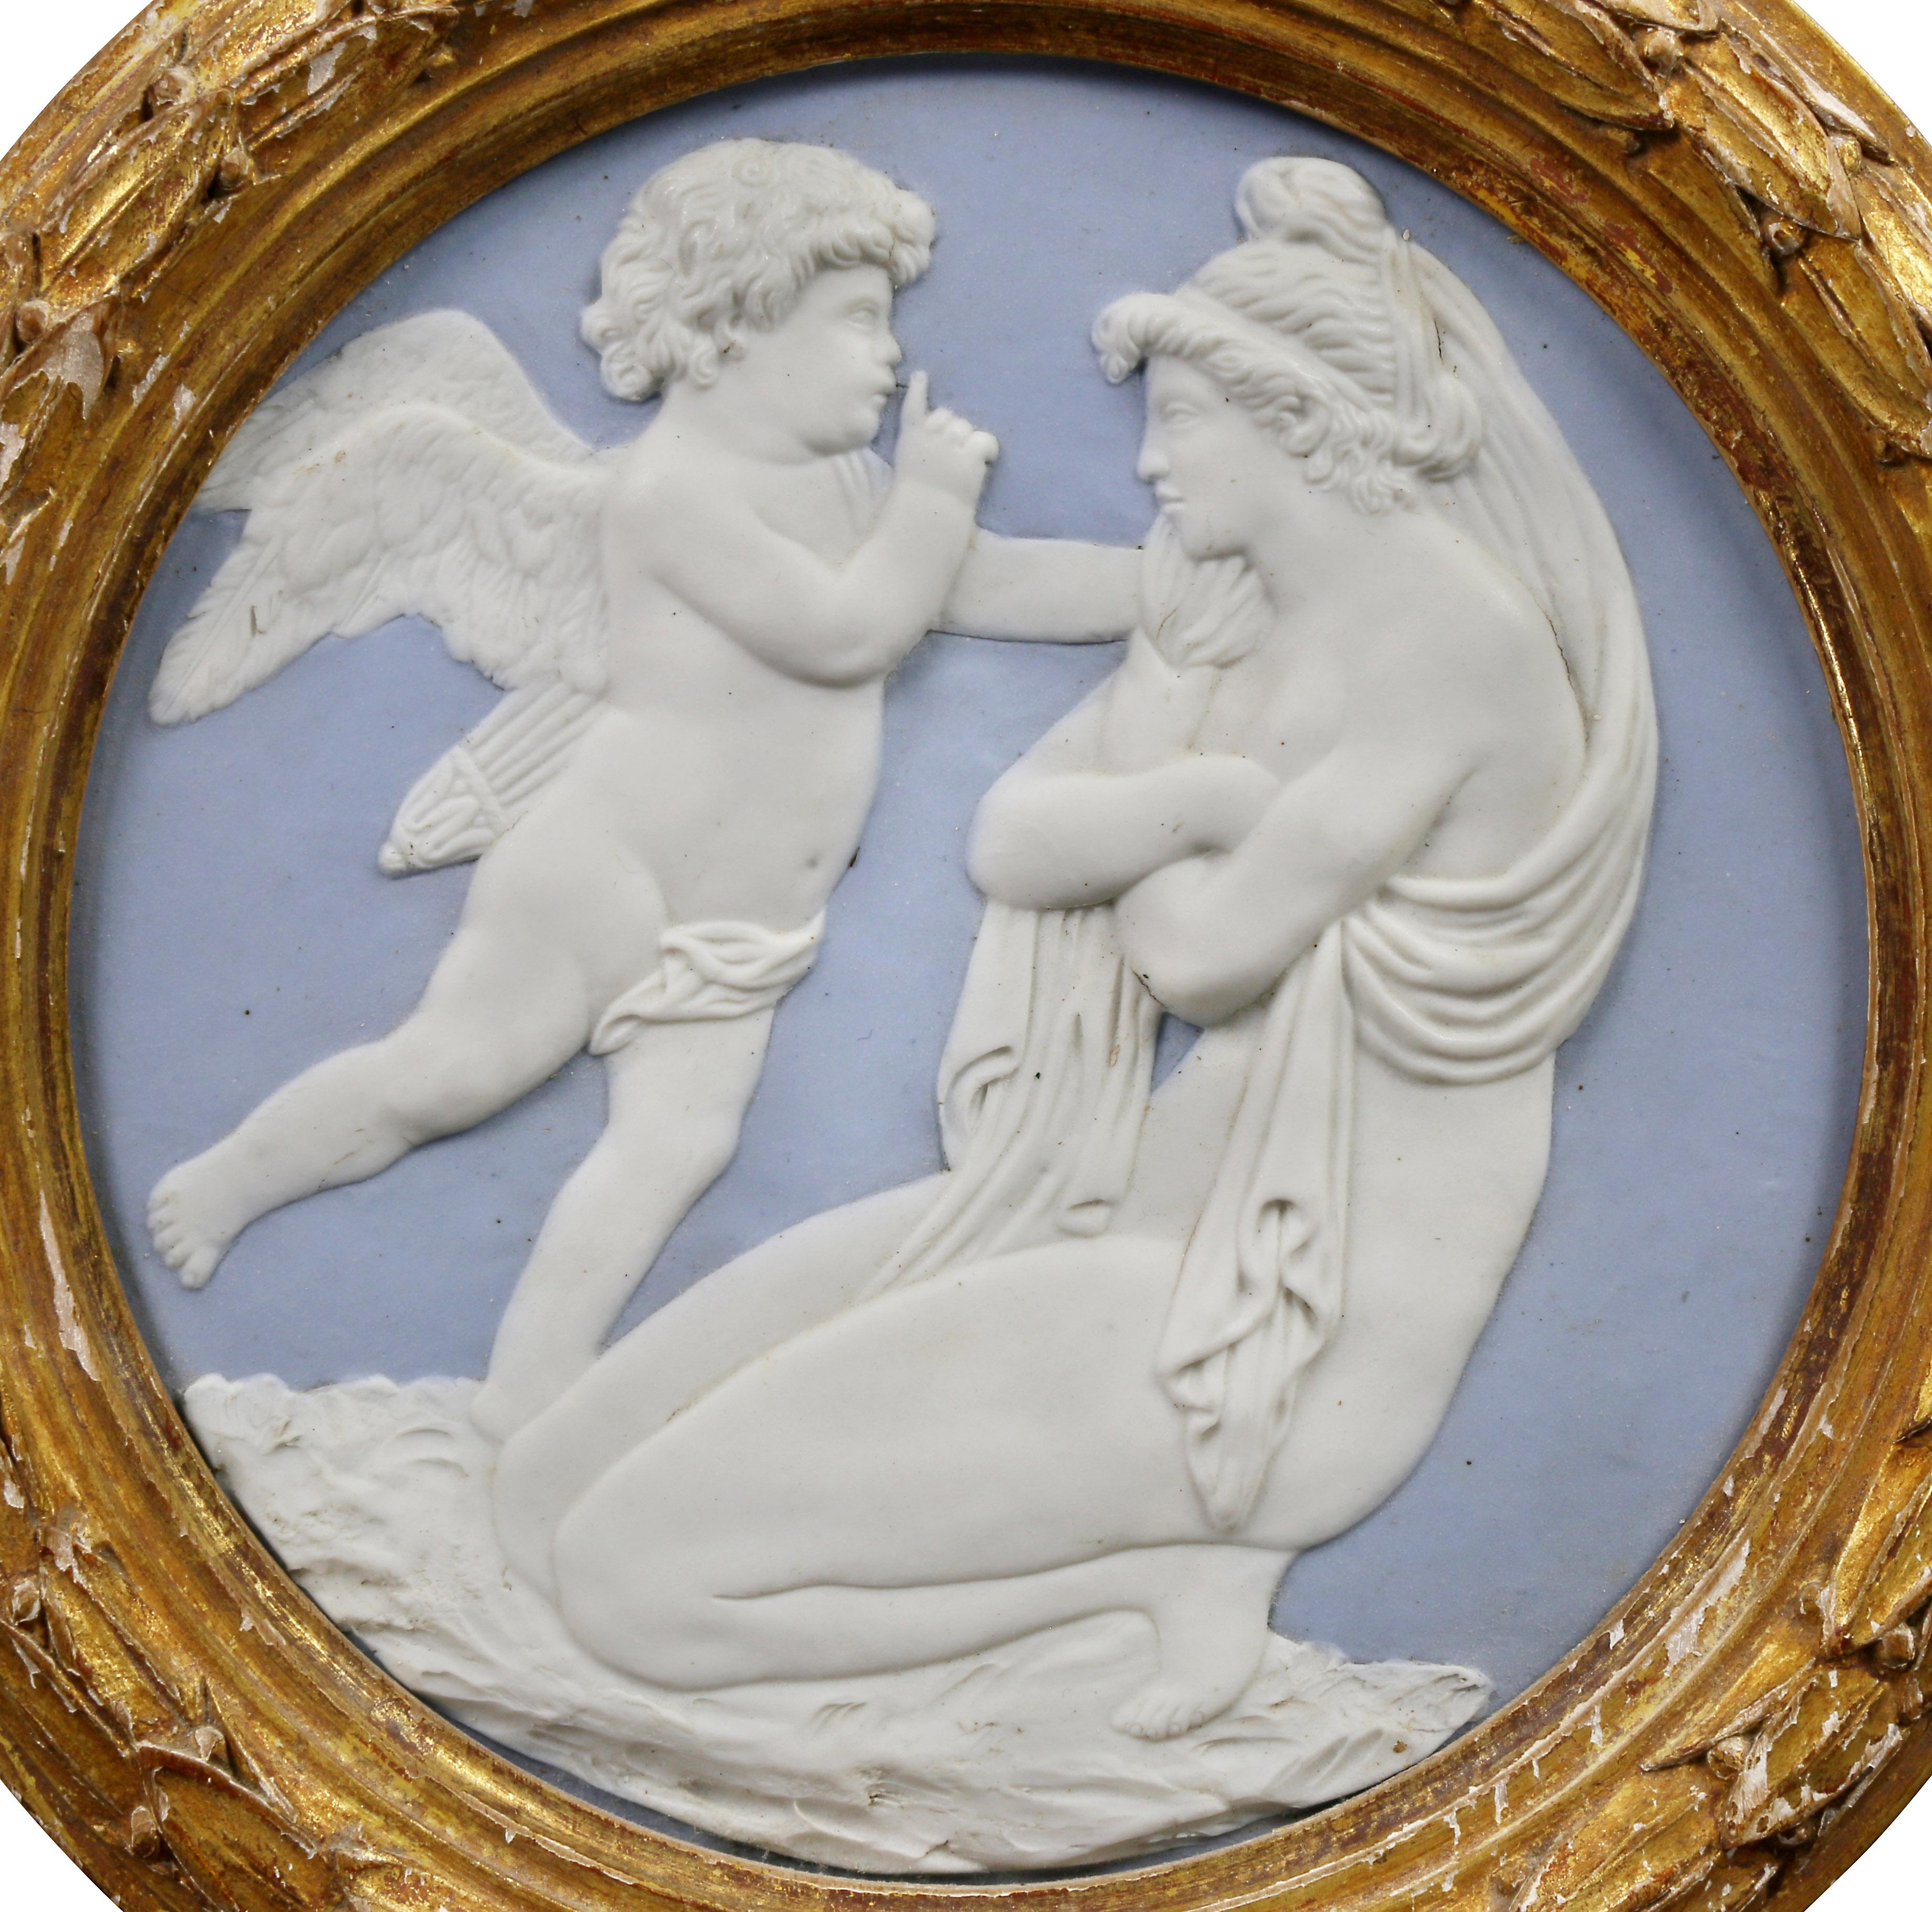 Circular in giltwood frames, each with lavender background and relief of Cupid and Psyche.